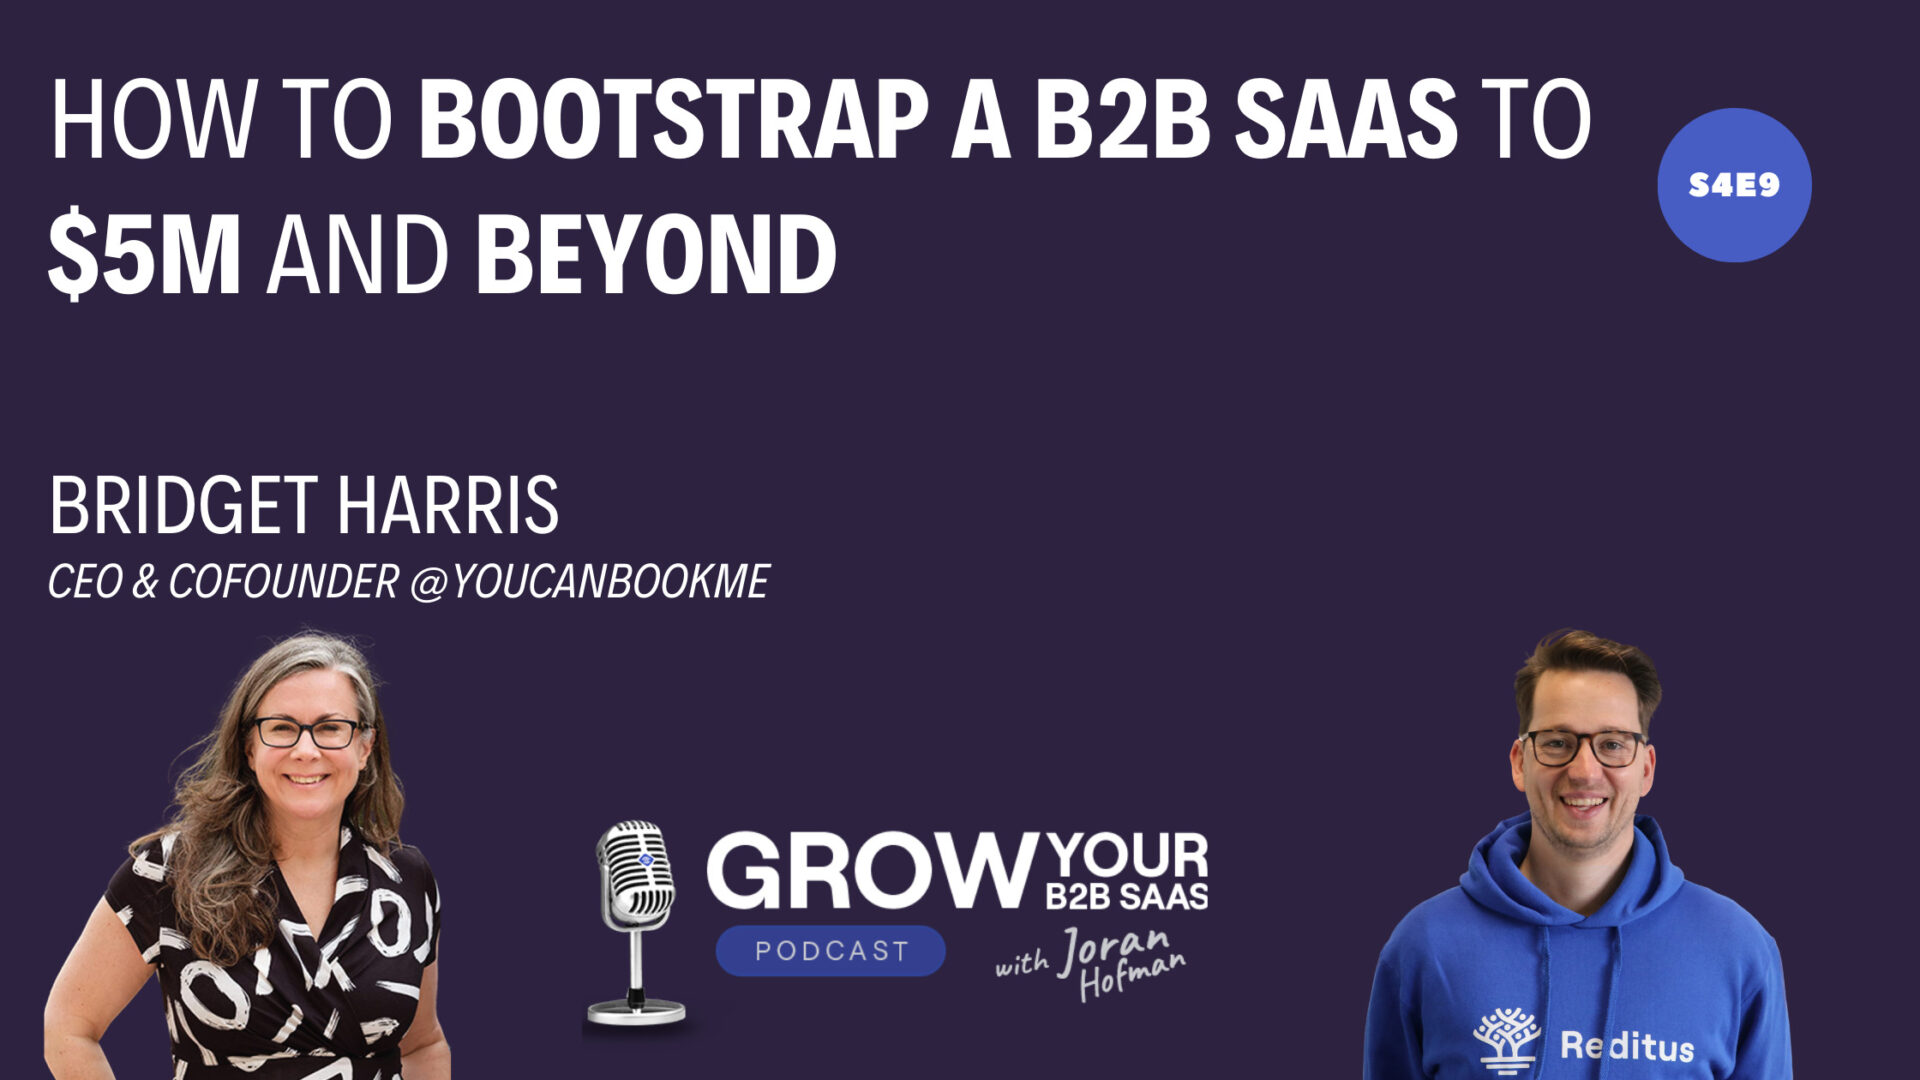 https://www.getreditus.com/podcast/s4e9-how-to-bootstrap-a-b2b-saas-to-5m-and-beyond-with-bridget-harris/